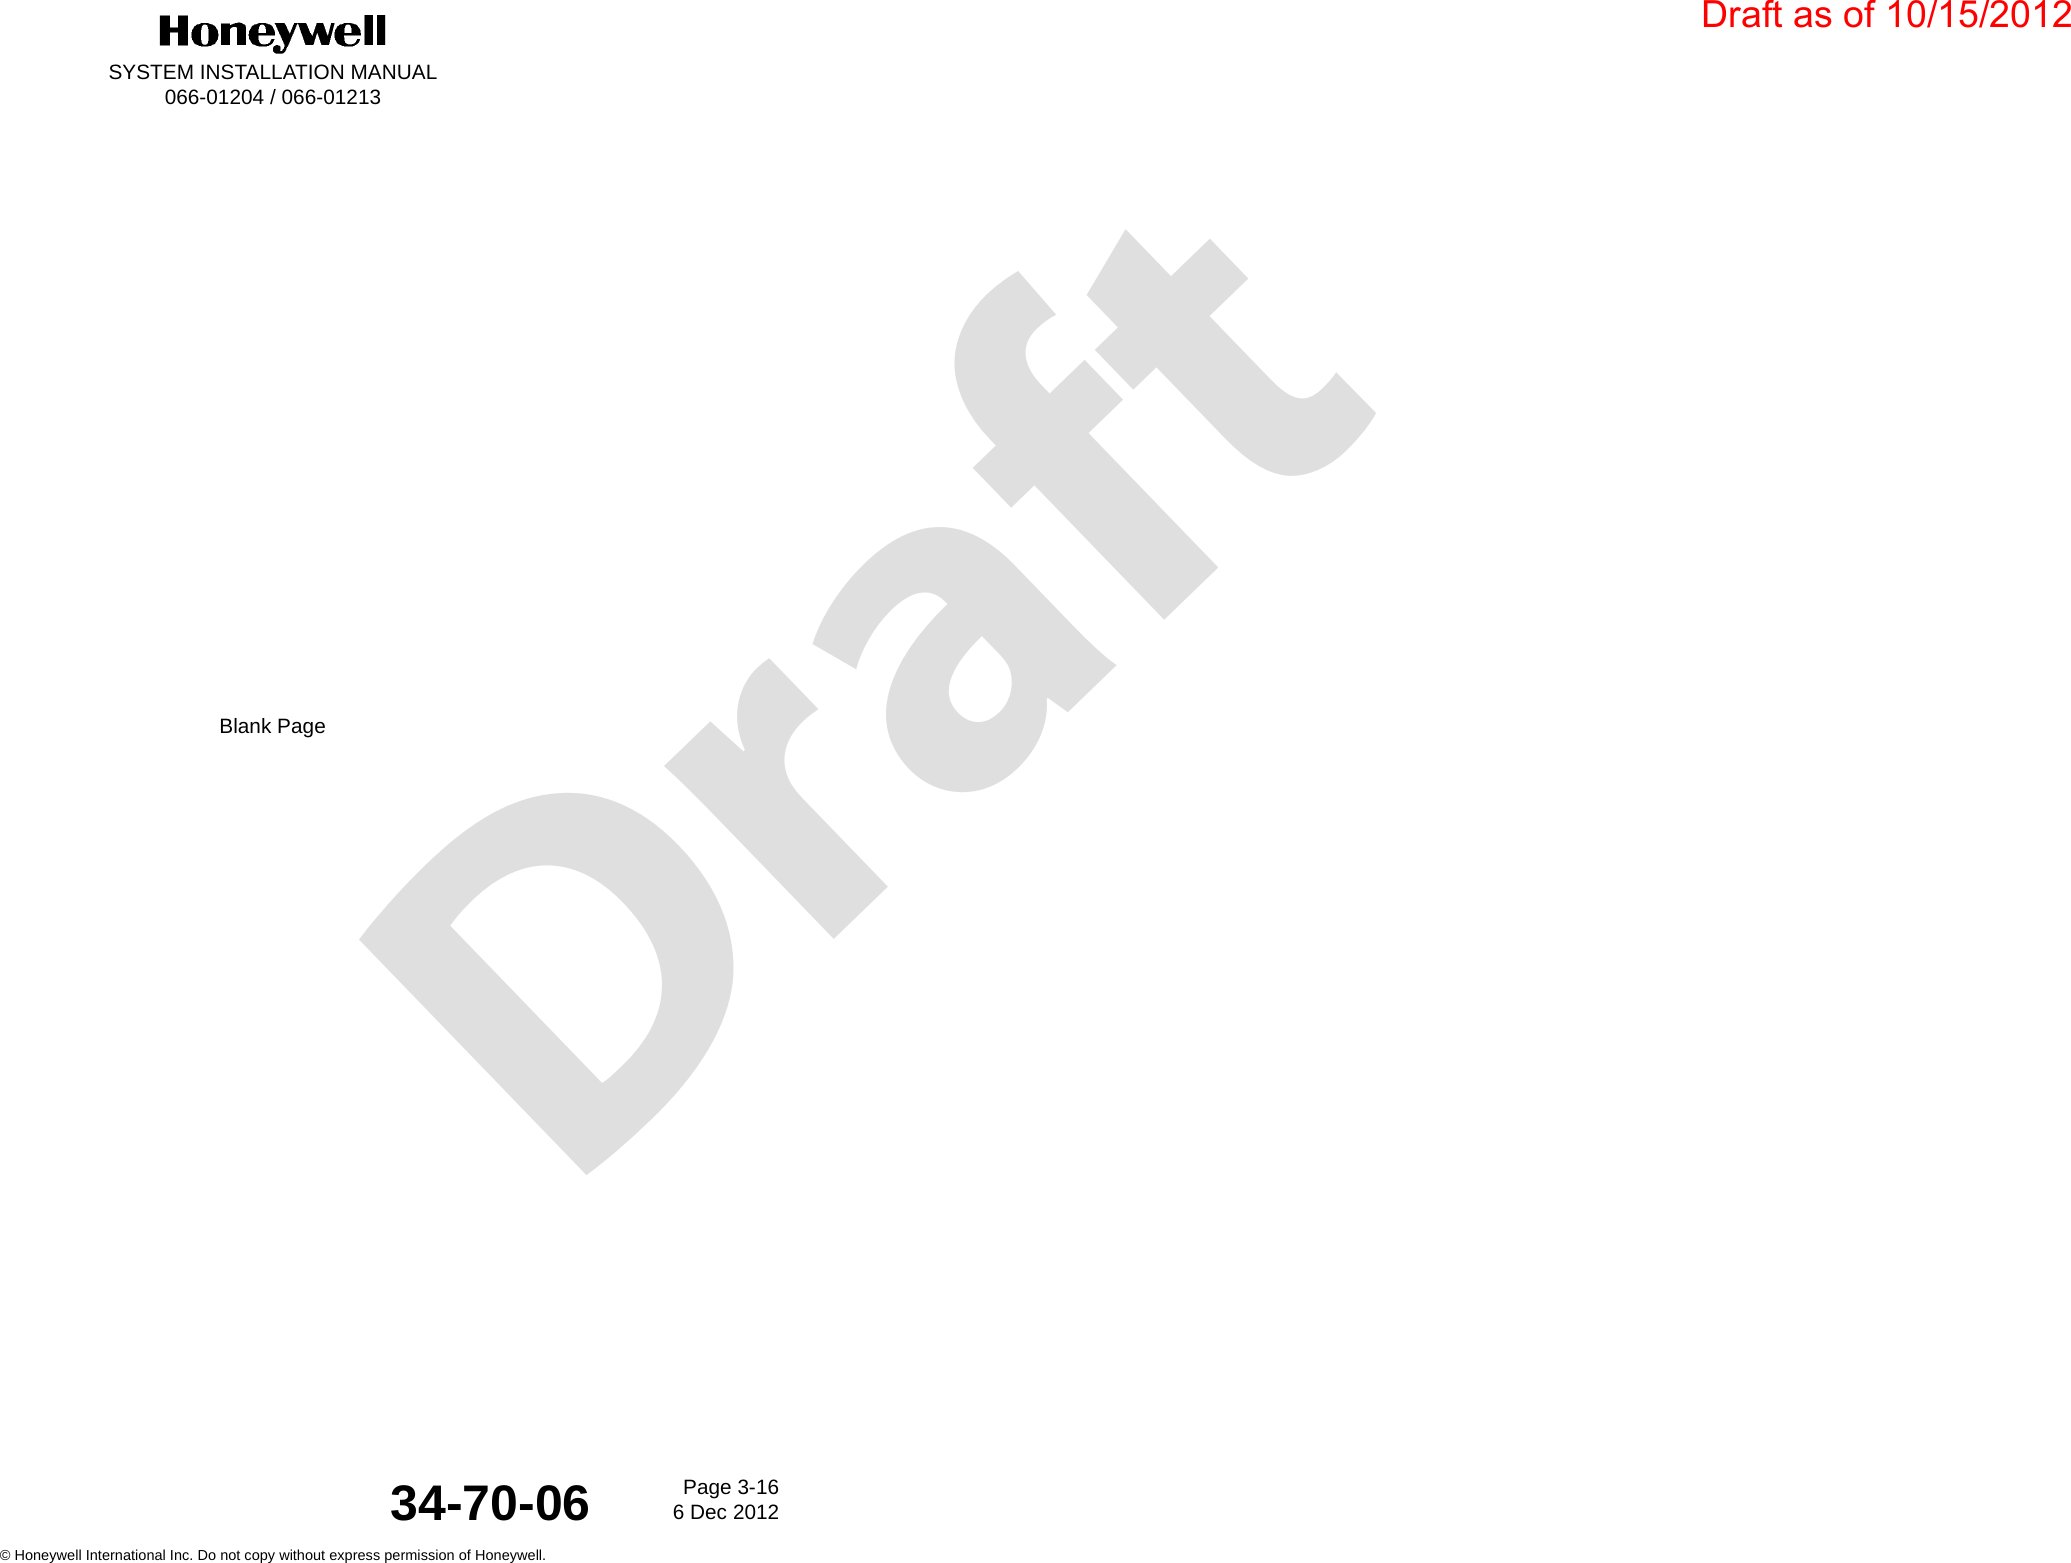 DraftSYSTEM INSTALLATION MANUAL066-01204 / 066-01213Page 3-166 Dec 2012© Honeywell International Inc. Do not copy without express permission of Honeywell.34-70-06Blank PageDraft as of 10/15/2012